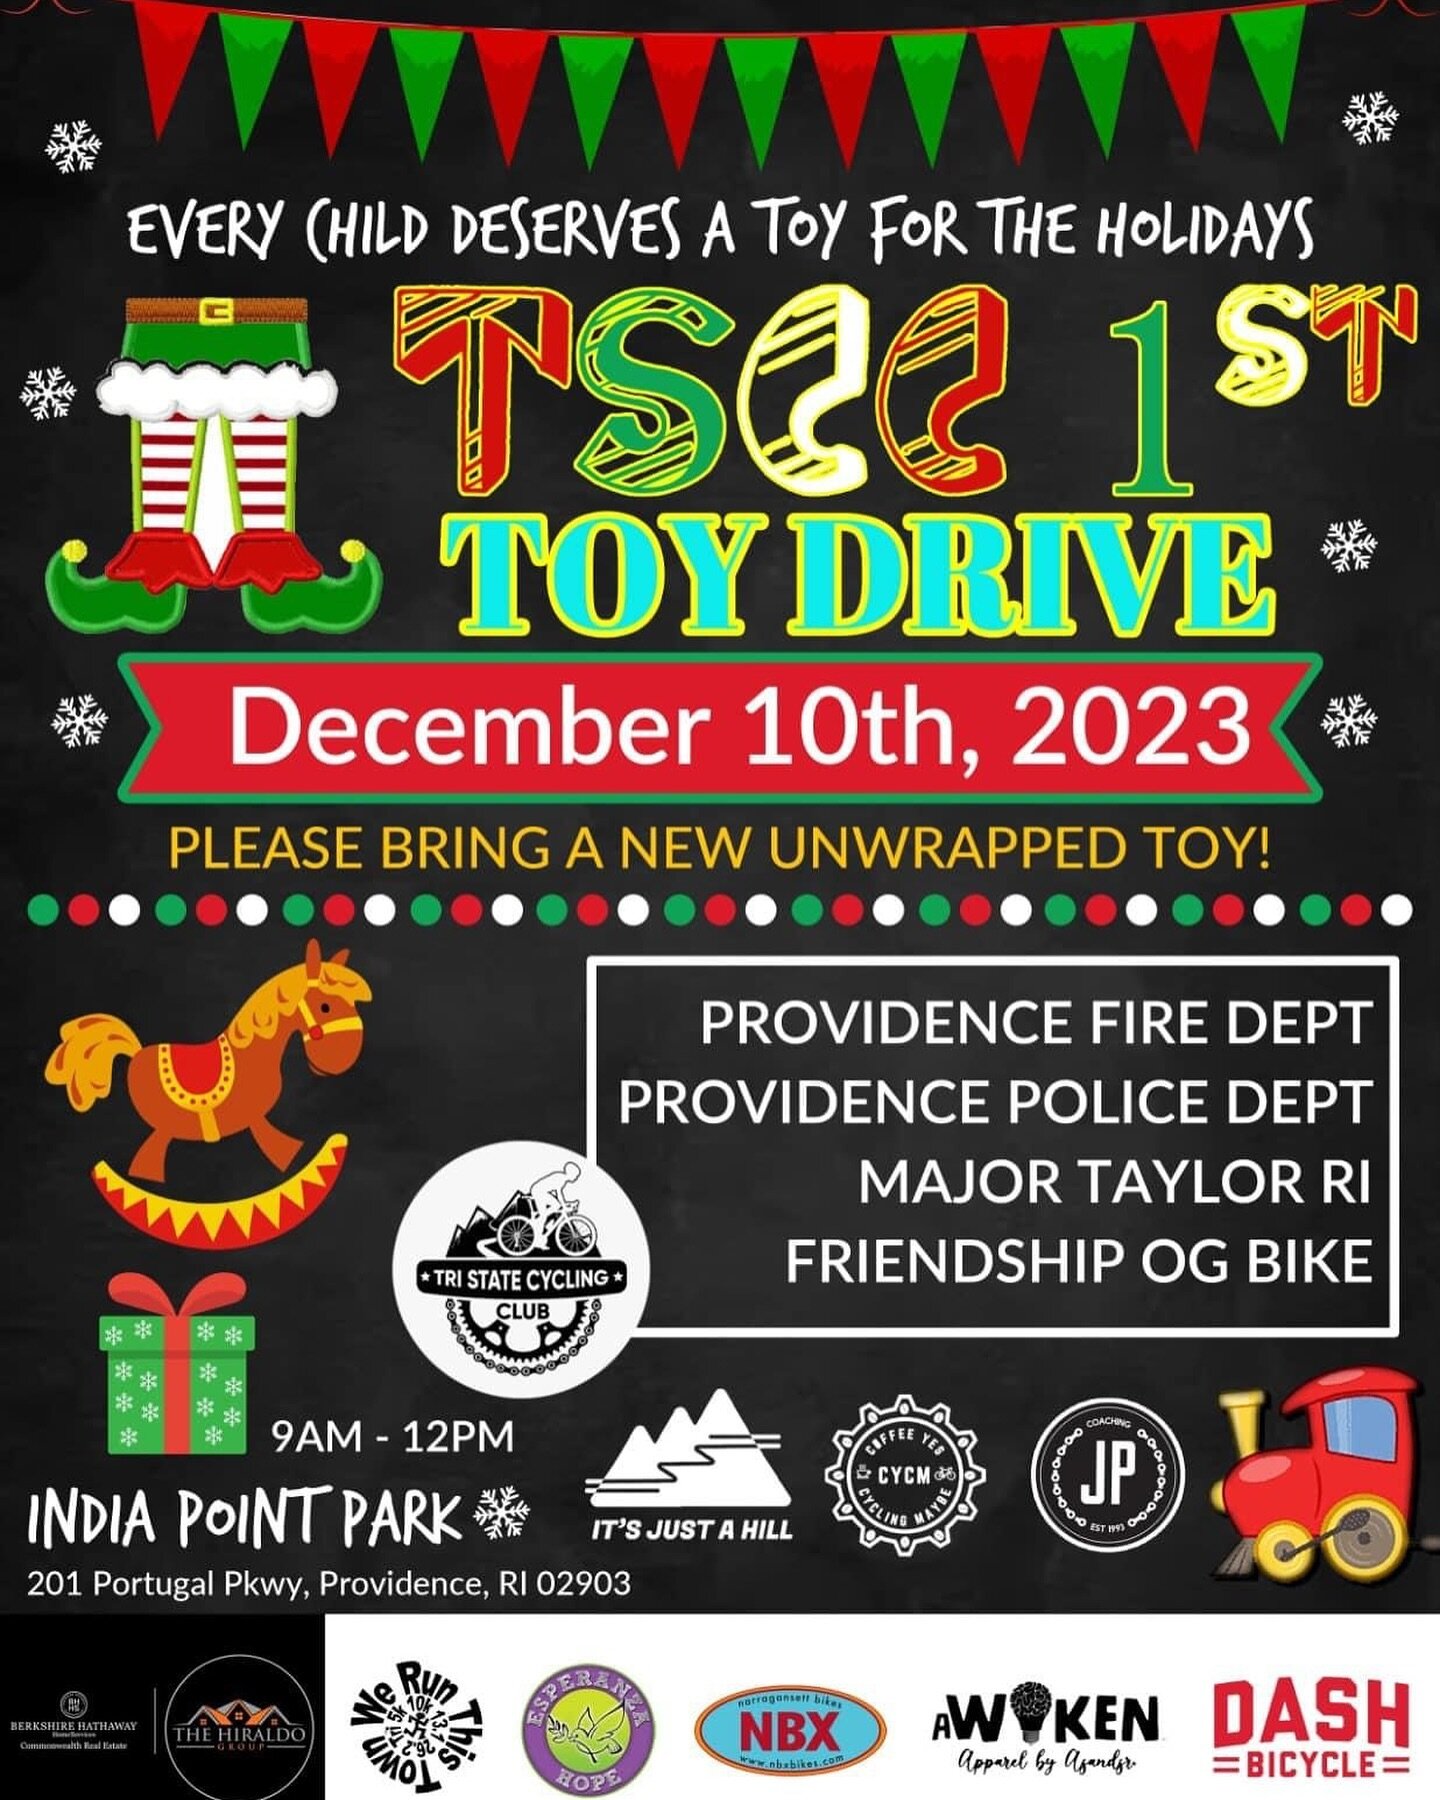 Come ride with us and help some kids smile a bit more this holiday season. Please be on time and bring an unwrapped toy. Hope to see you there! #itsjustahill